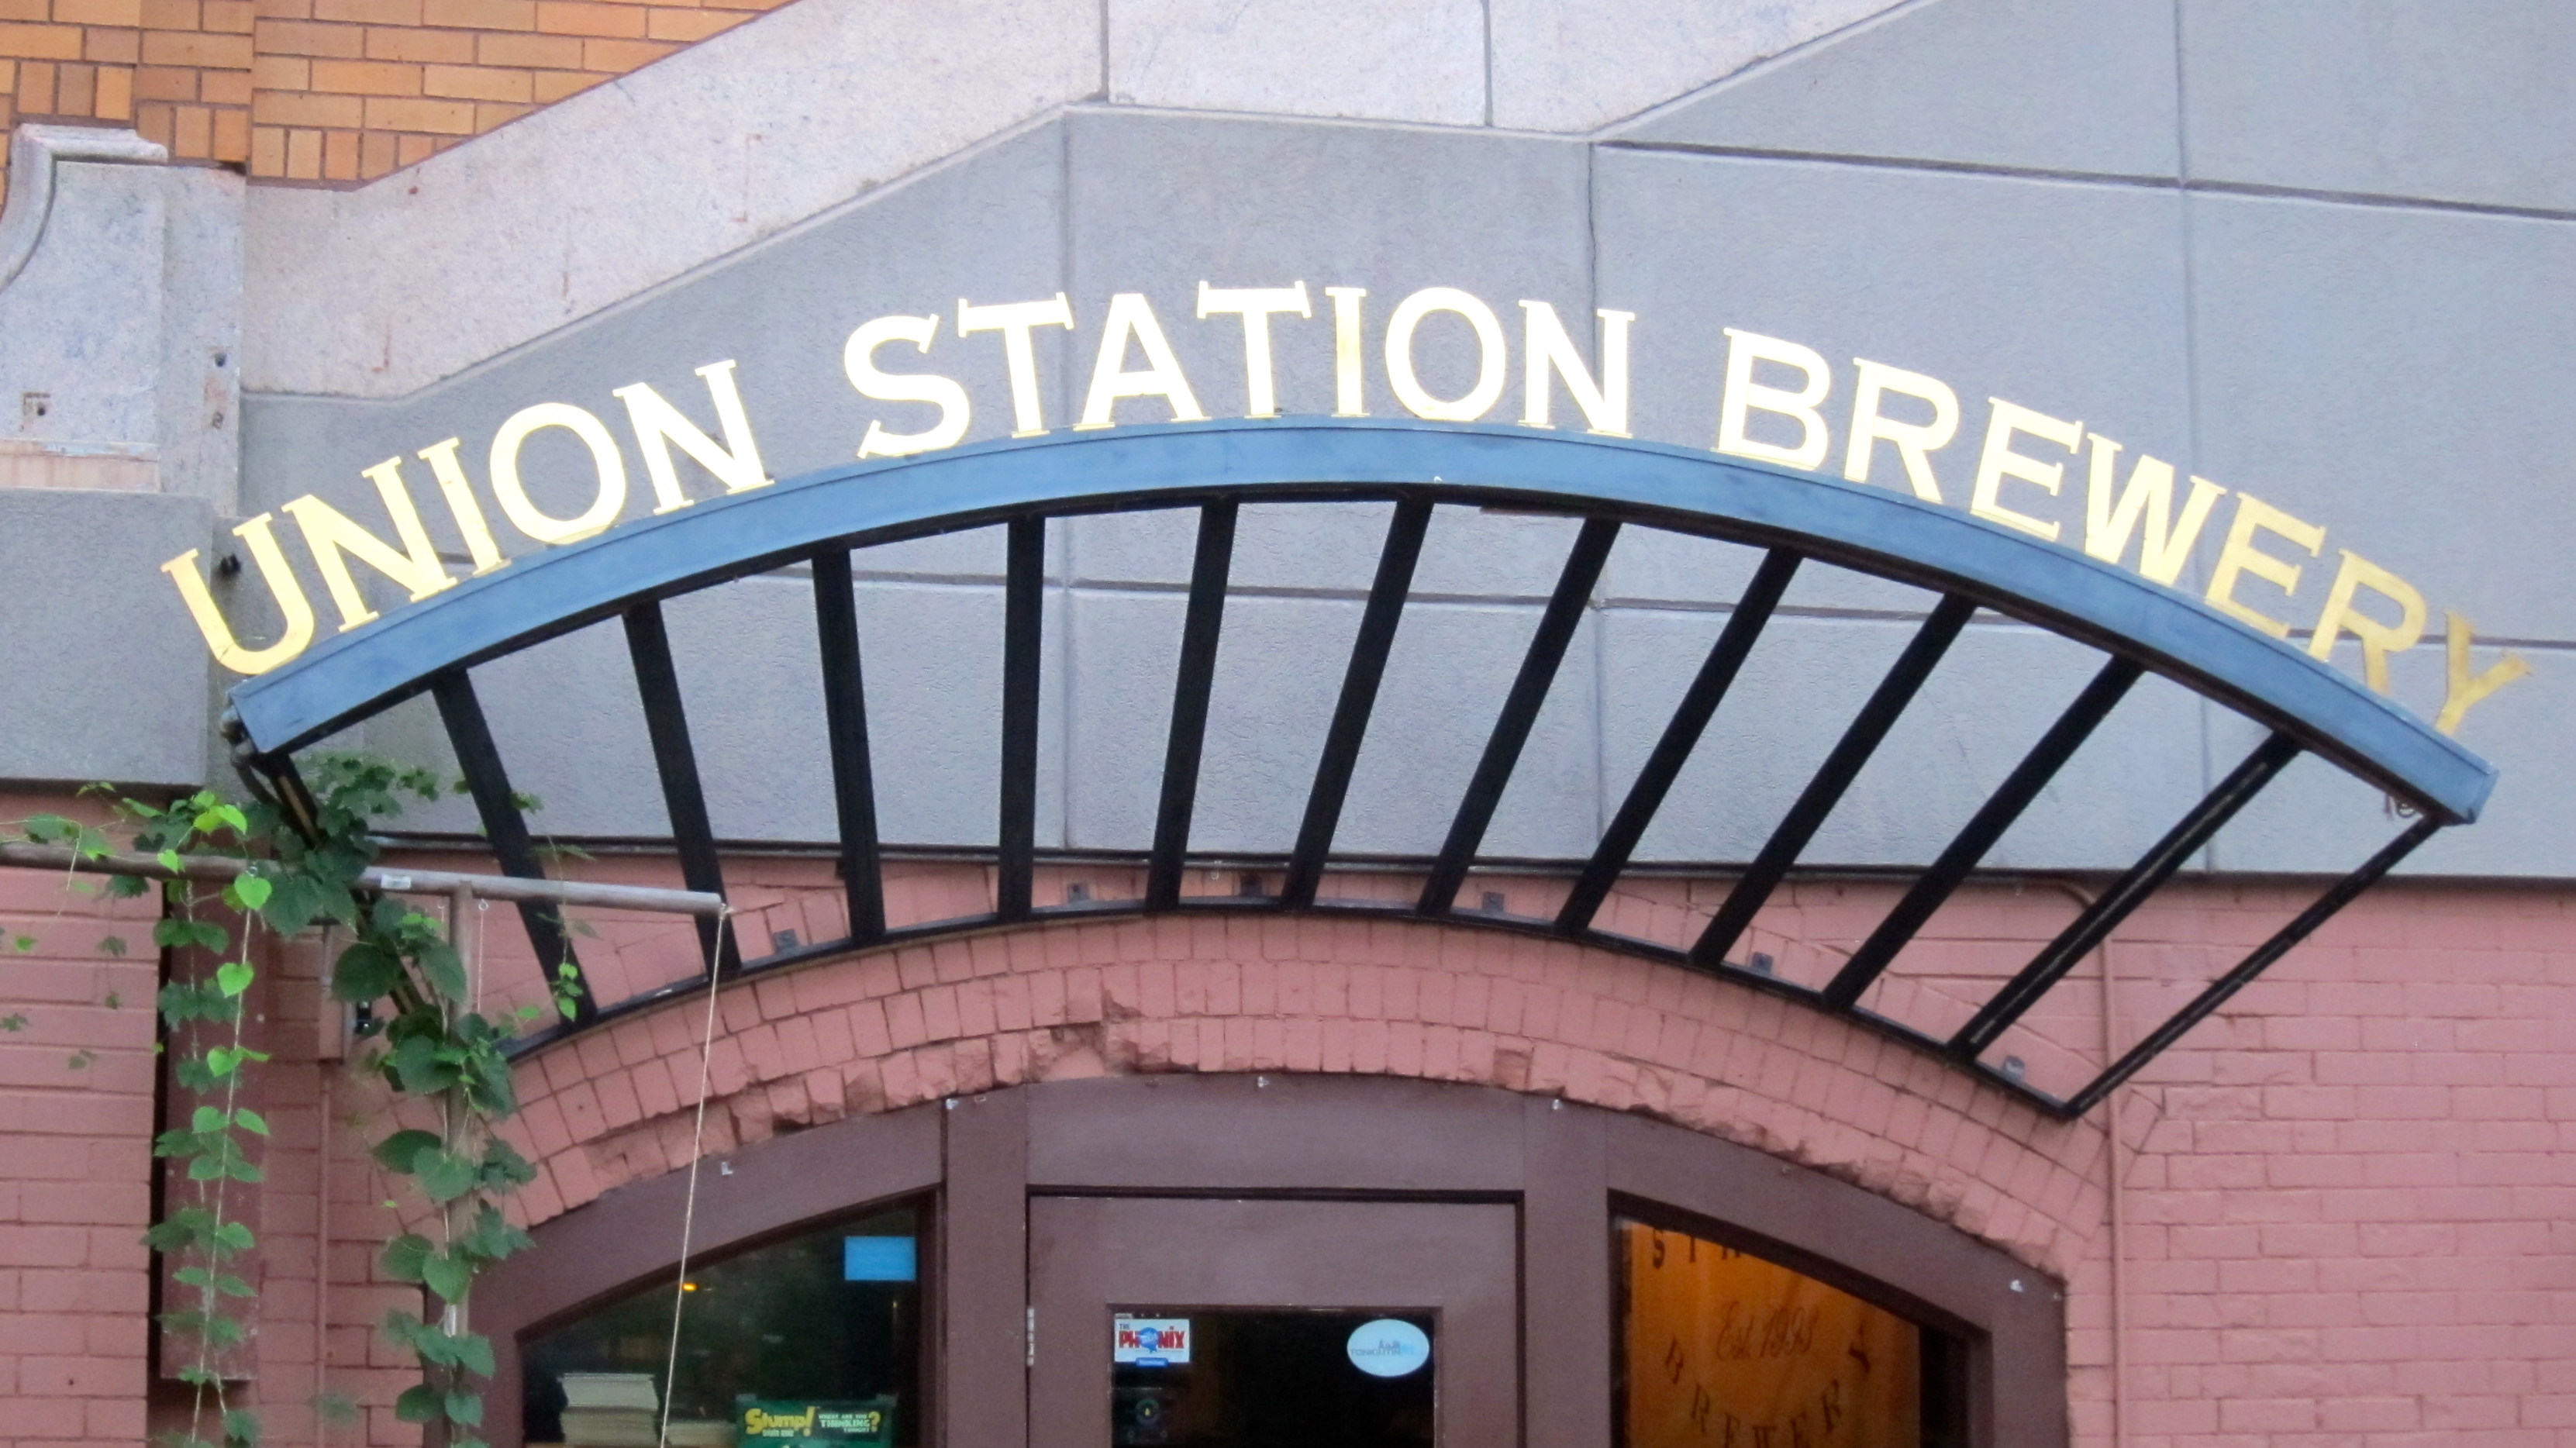 Union Station Brewery Doors